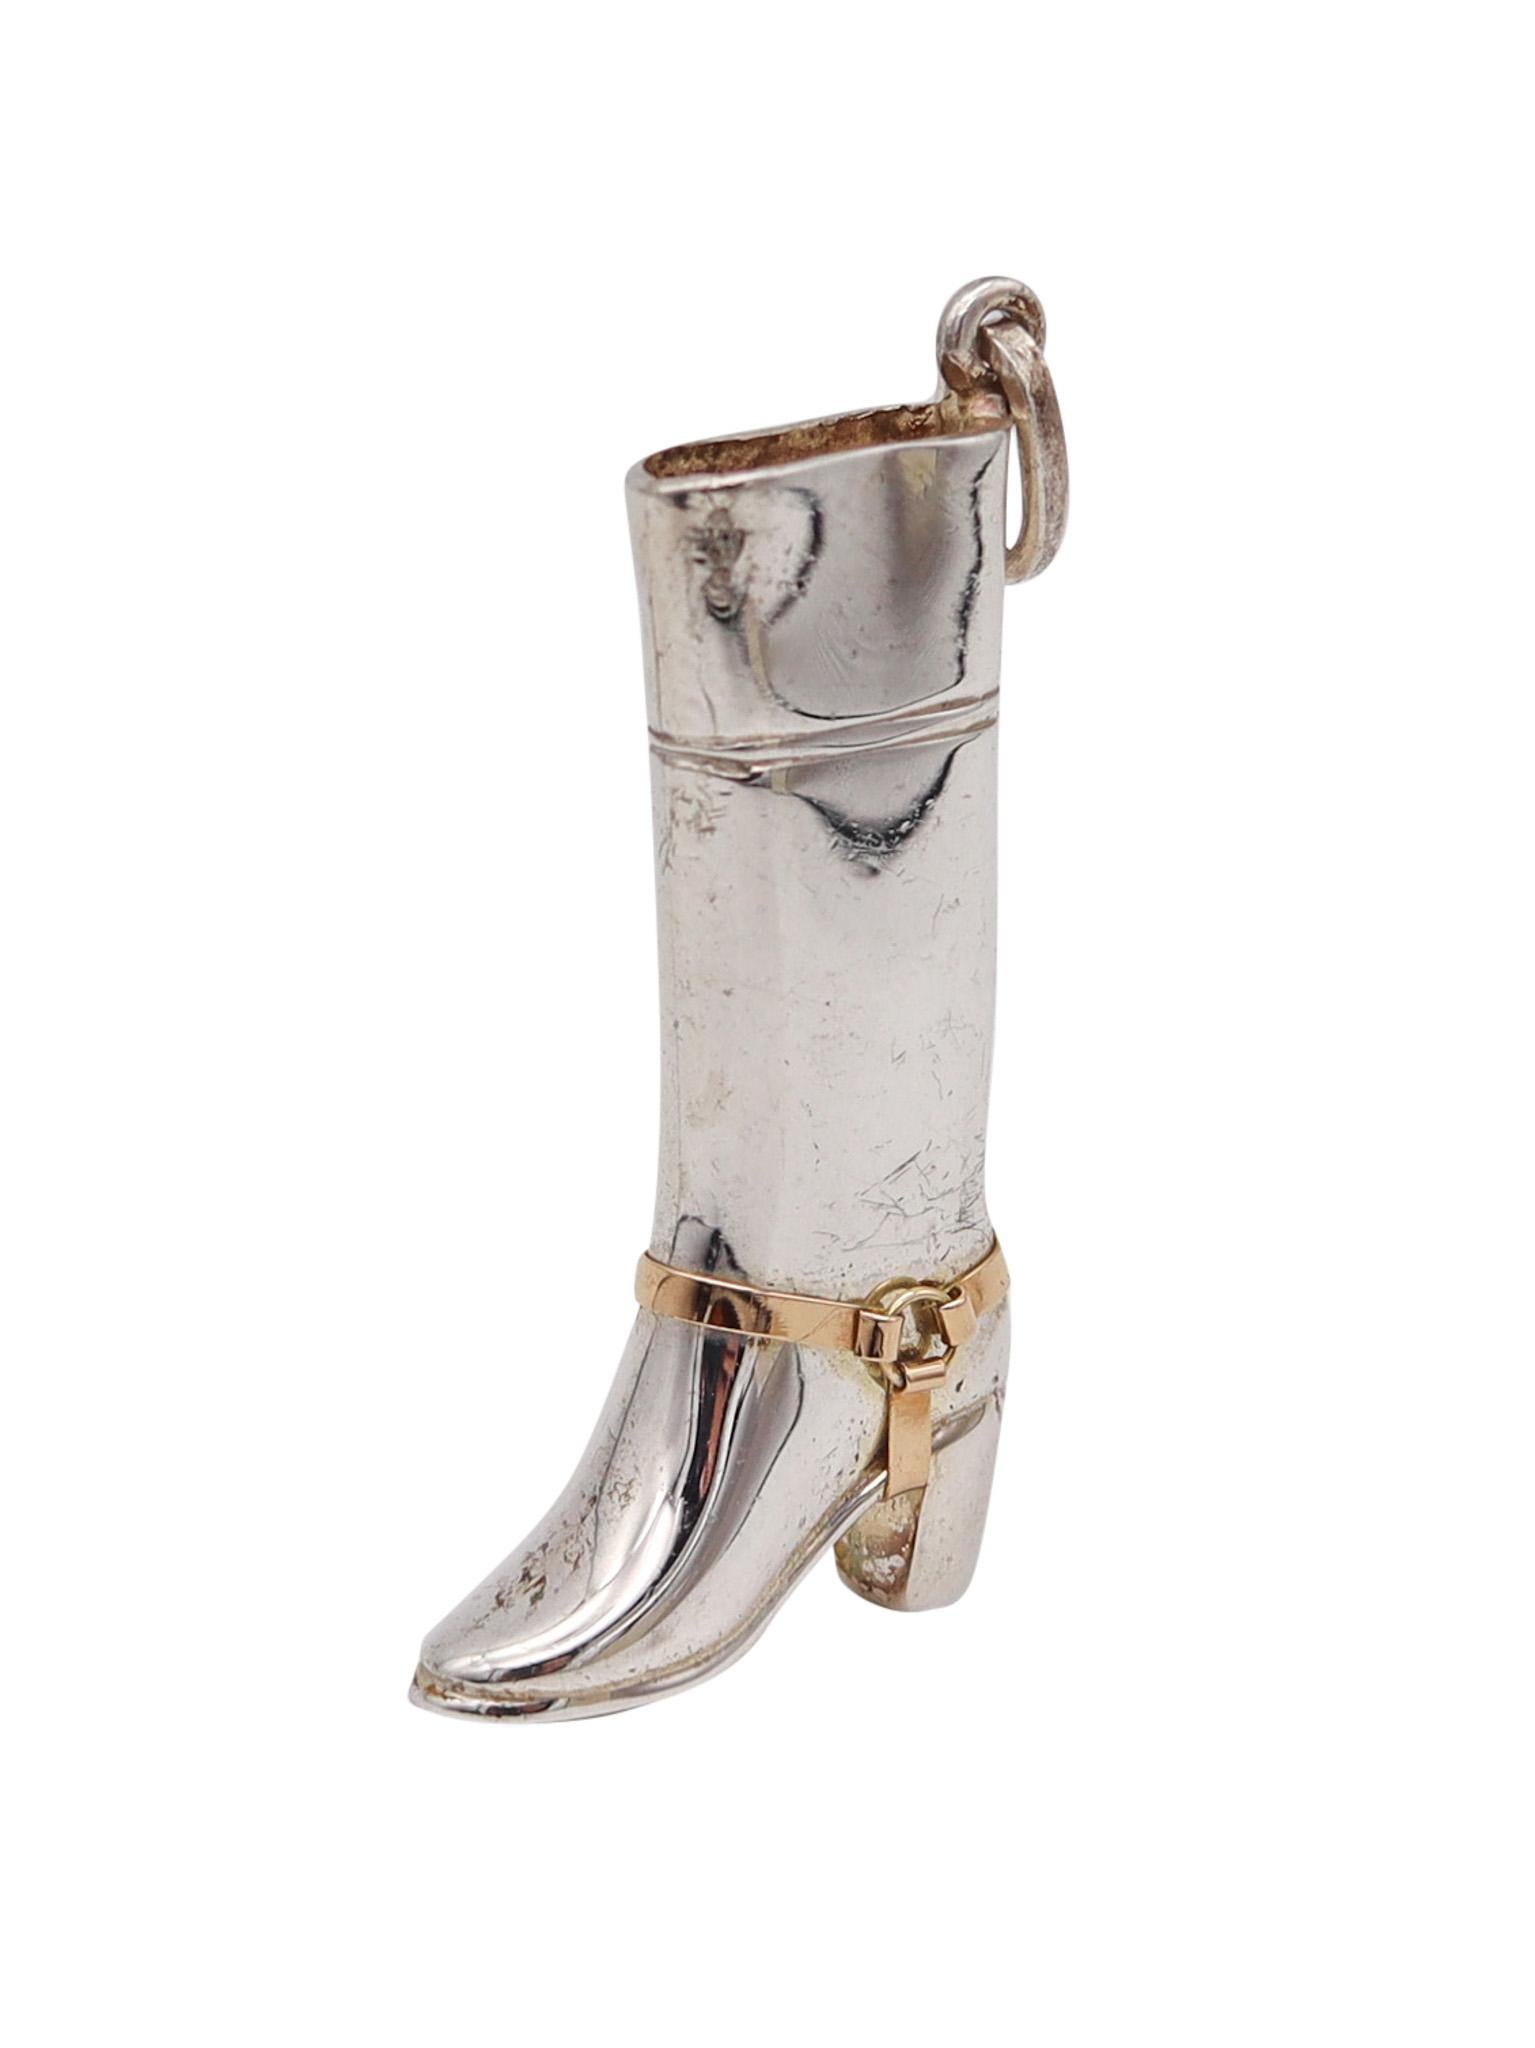 Pendant charm designed by Gucci.

Beautiful pendant-charm, created in Firenze Italy by the fashion house of Gucci, back in the 1980's. This pendant has been made as a miniature in the shape of the iconic high boots in solid .925/.999 sterling silver